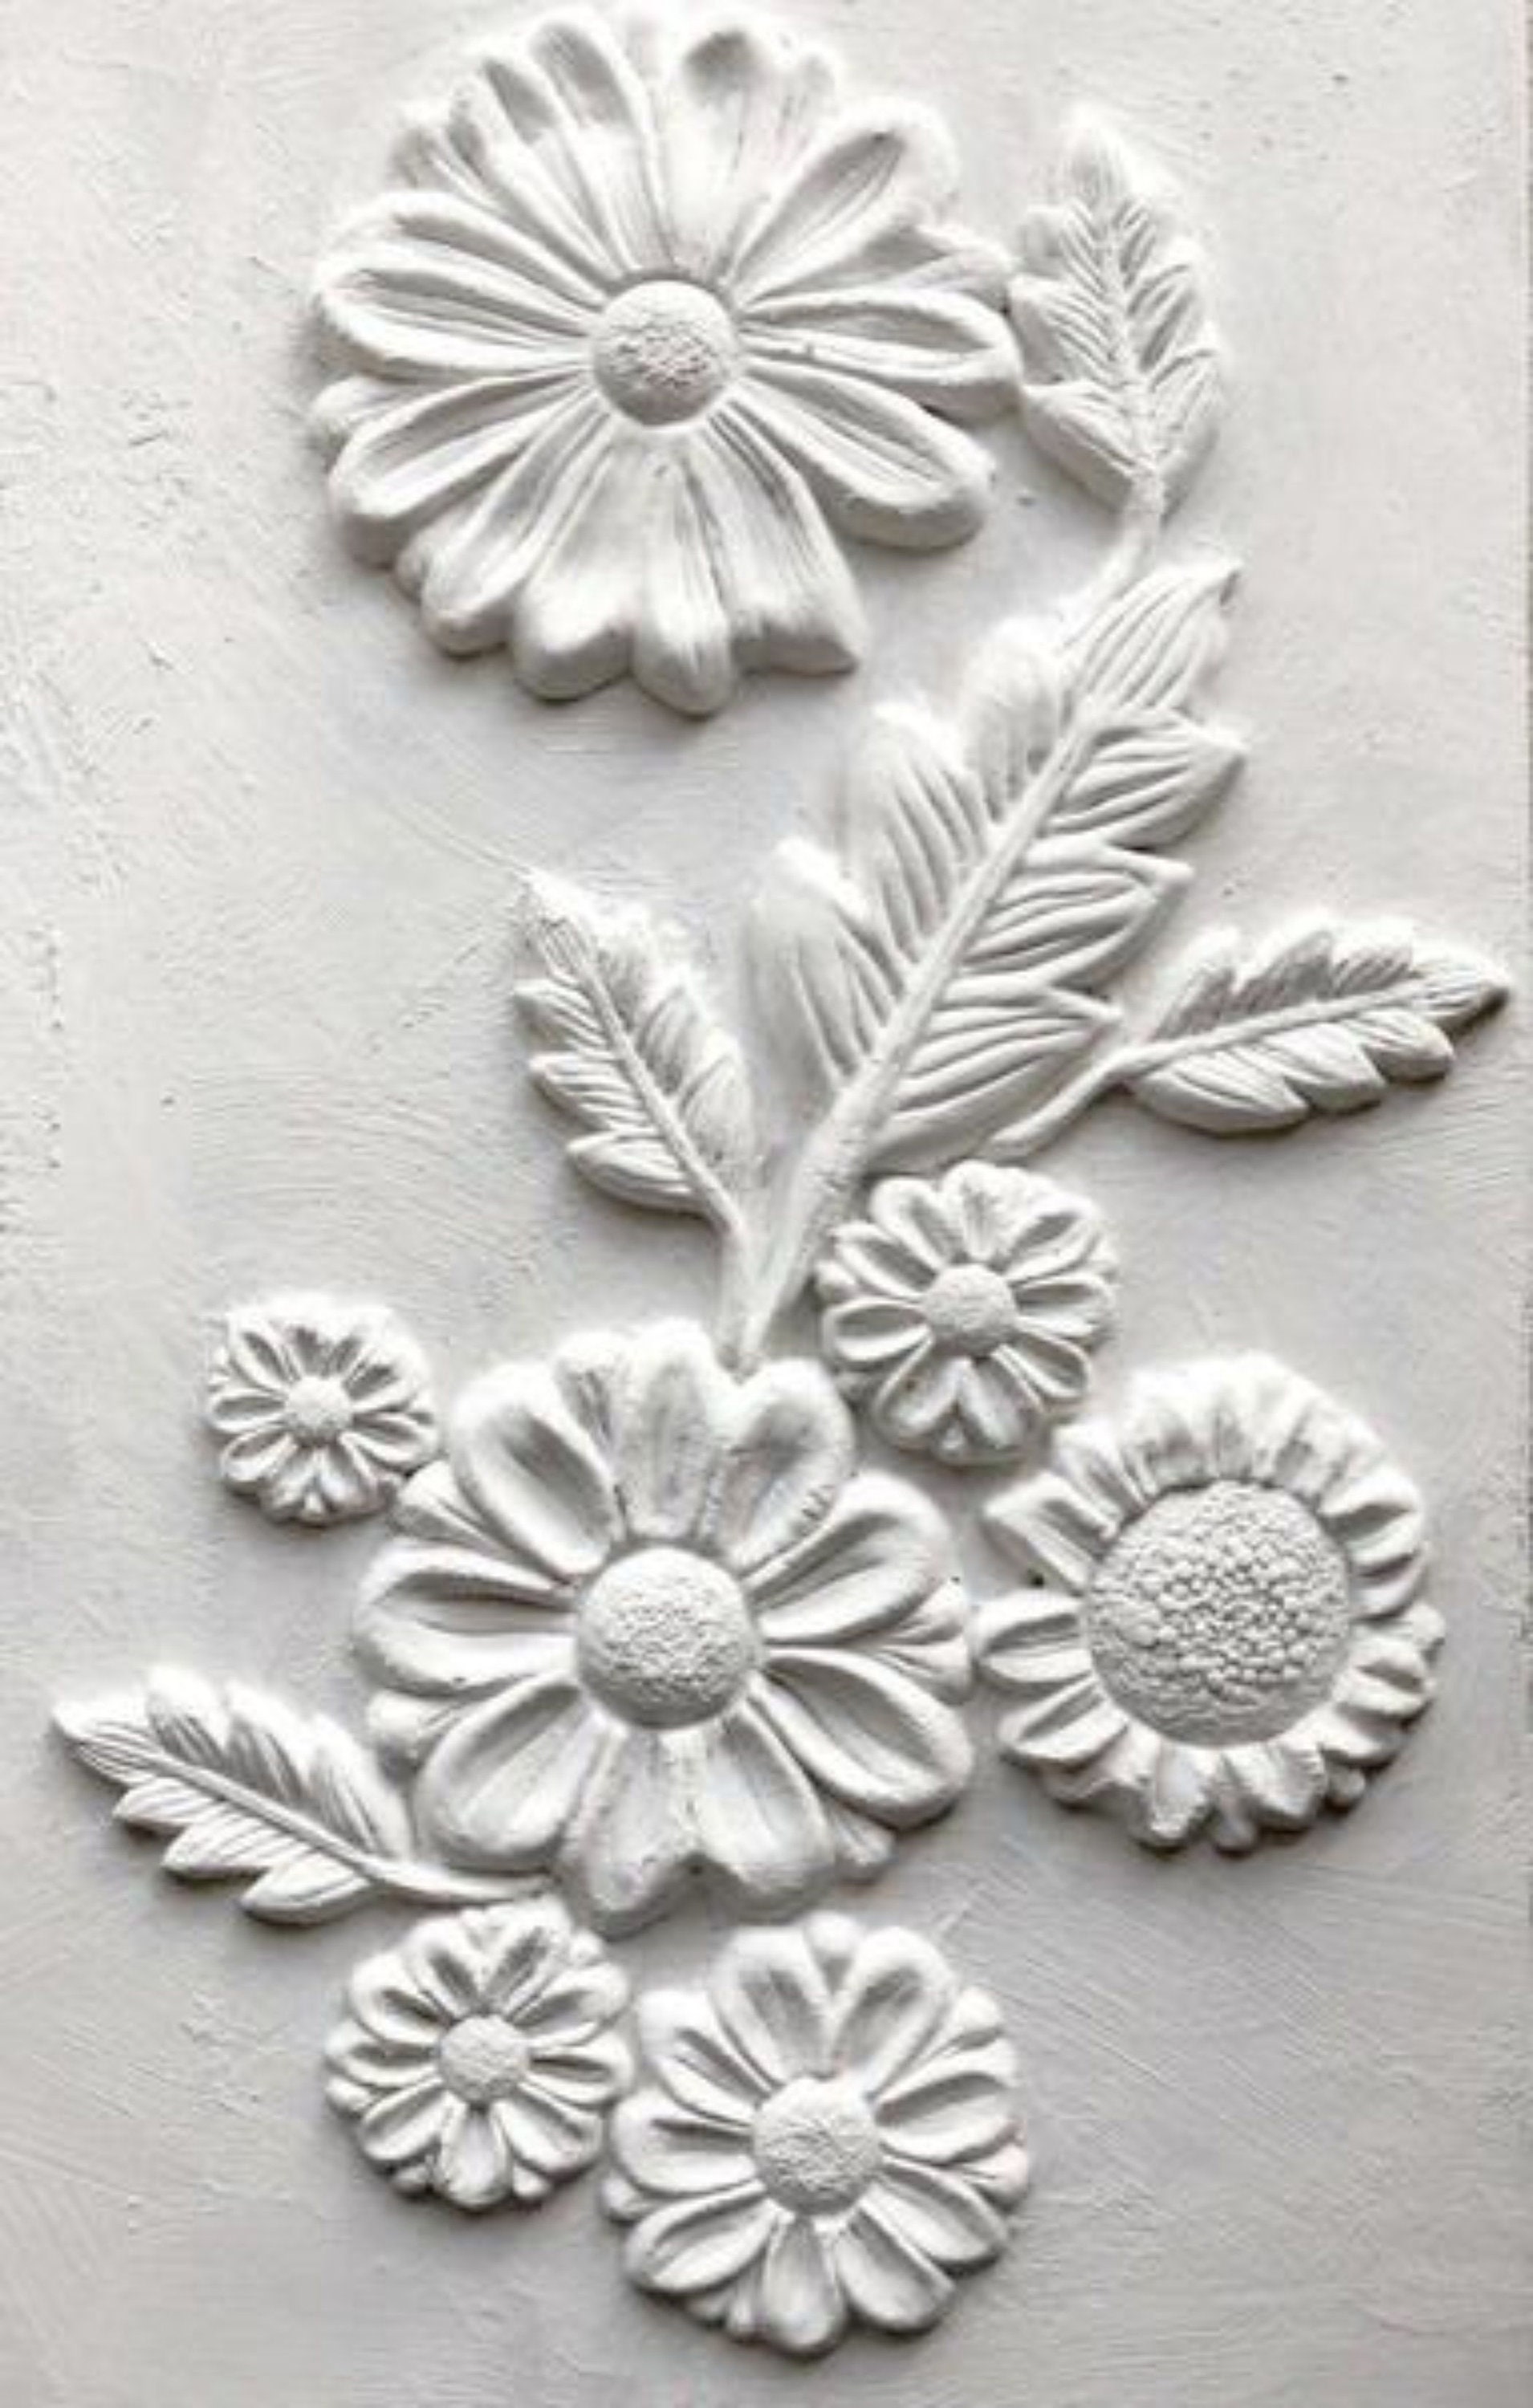 Lot - SIX CERAMIC MOLDS OF FLOWER AND CORN DESIGNS